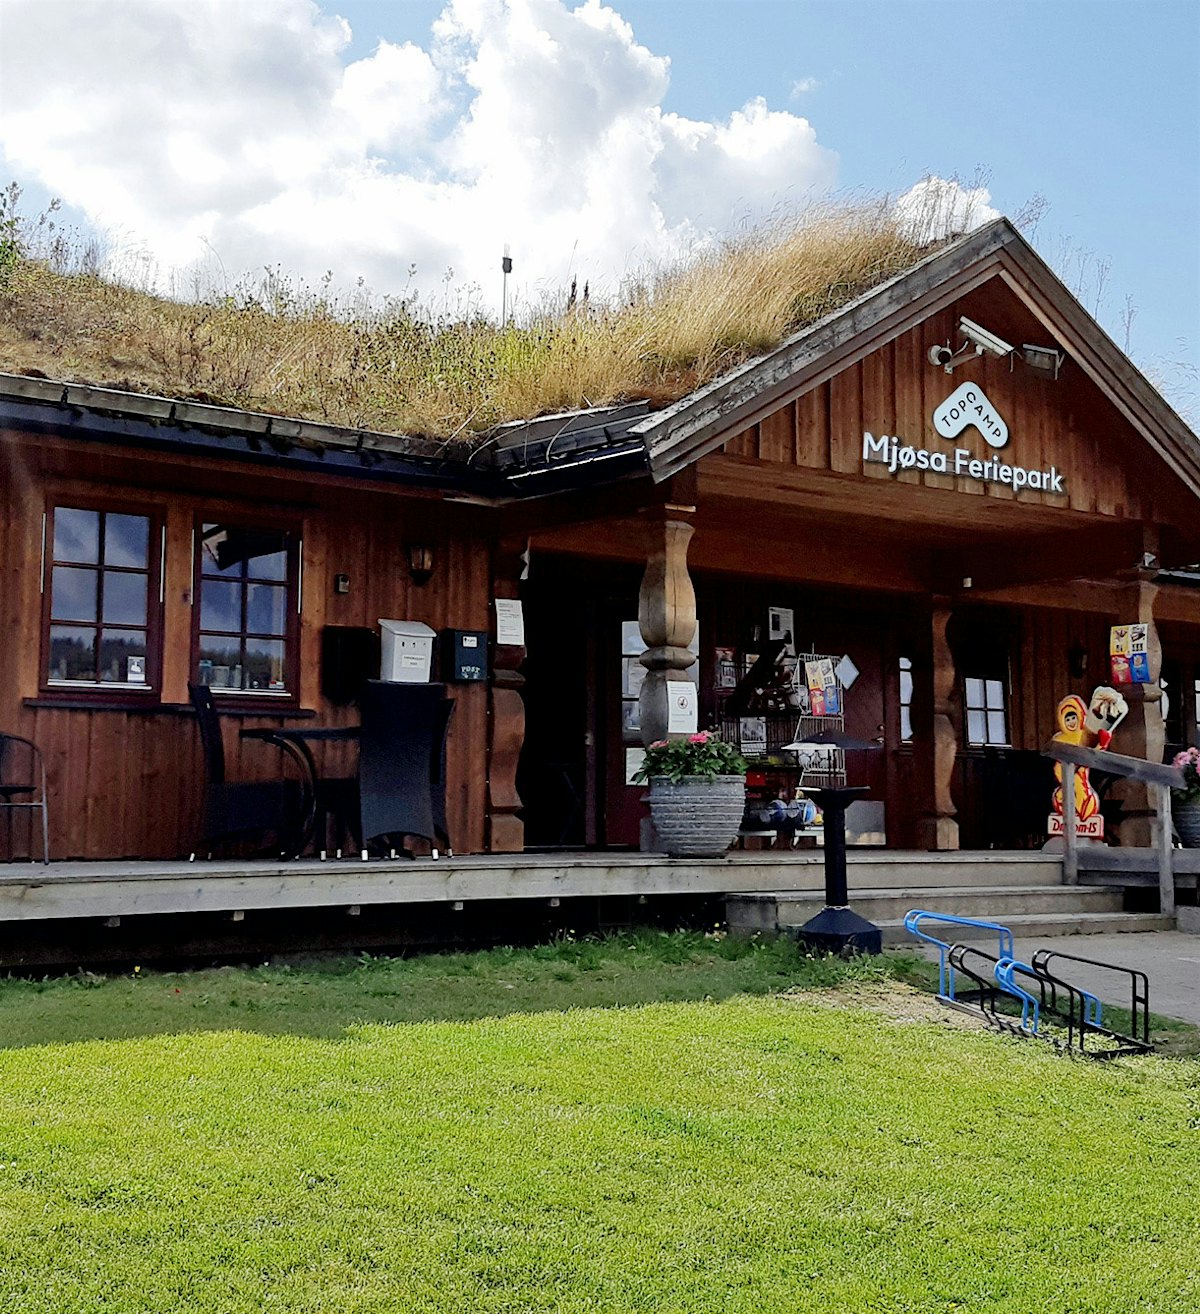 The reception building at Topcamp Mjøsa from the off-season. Photo